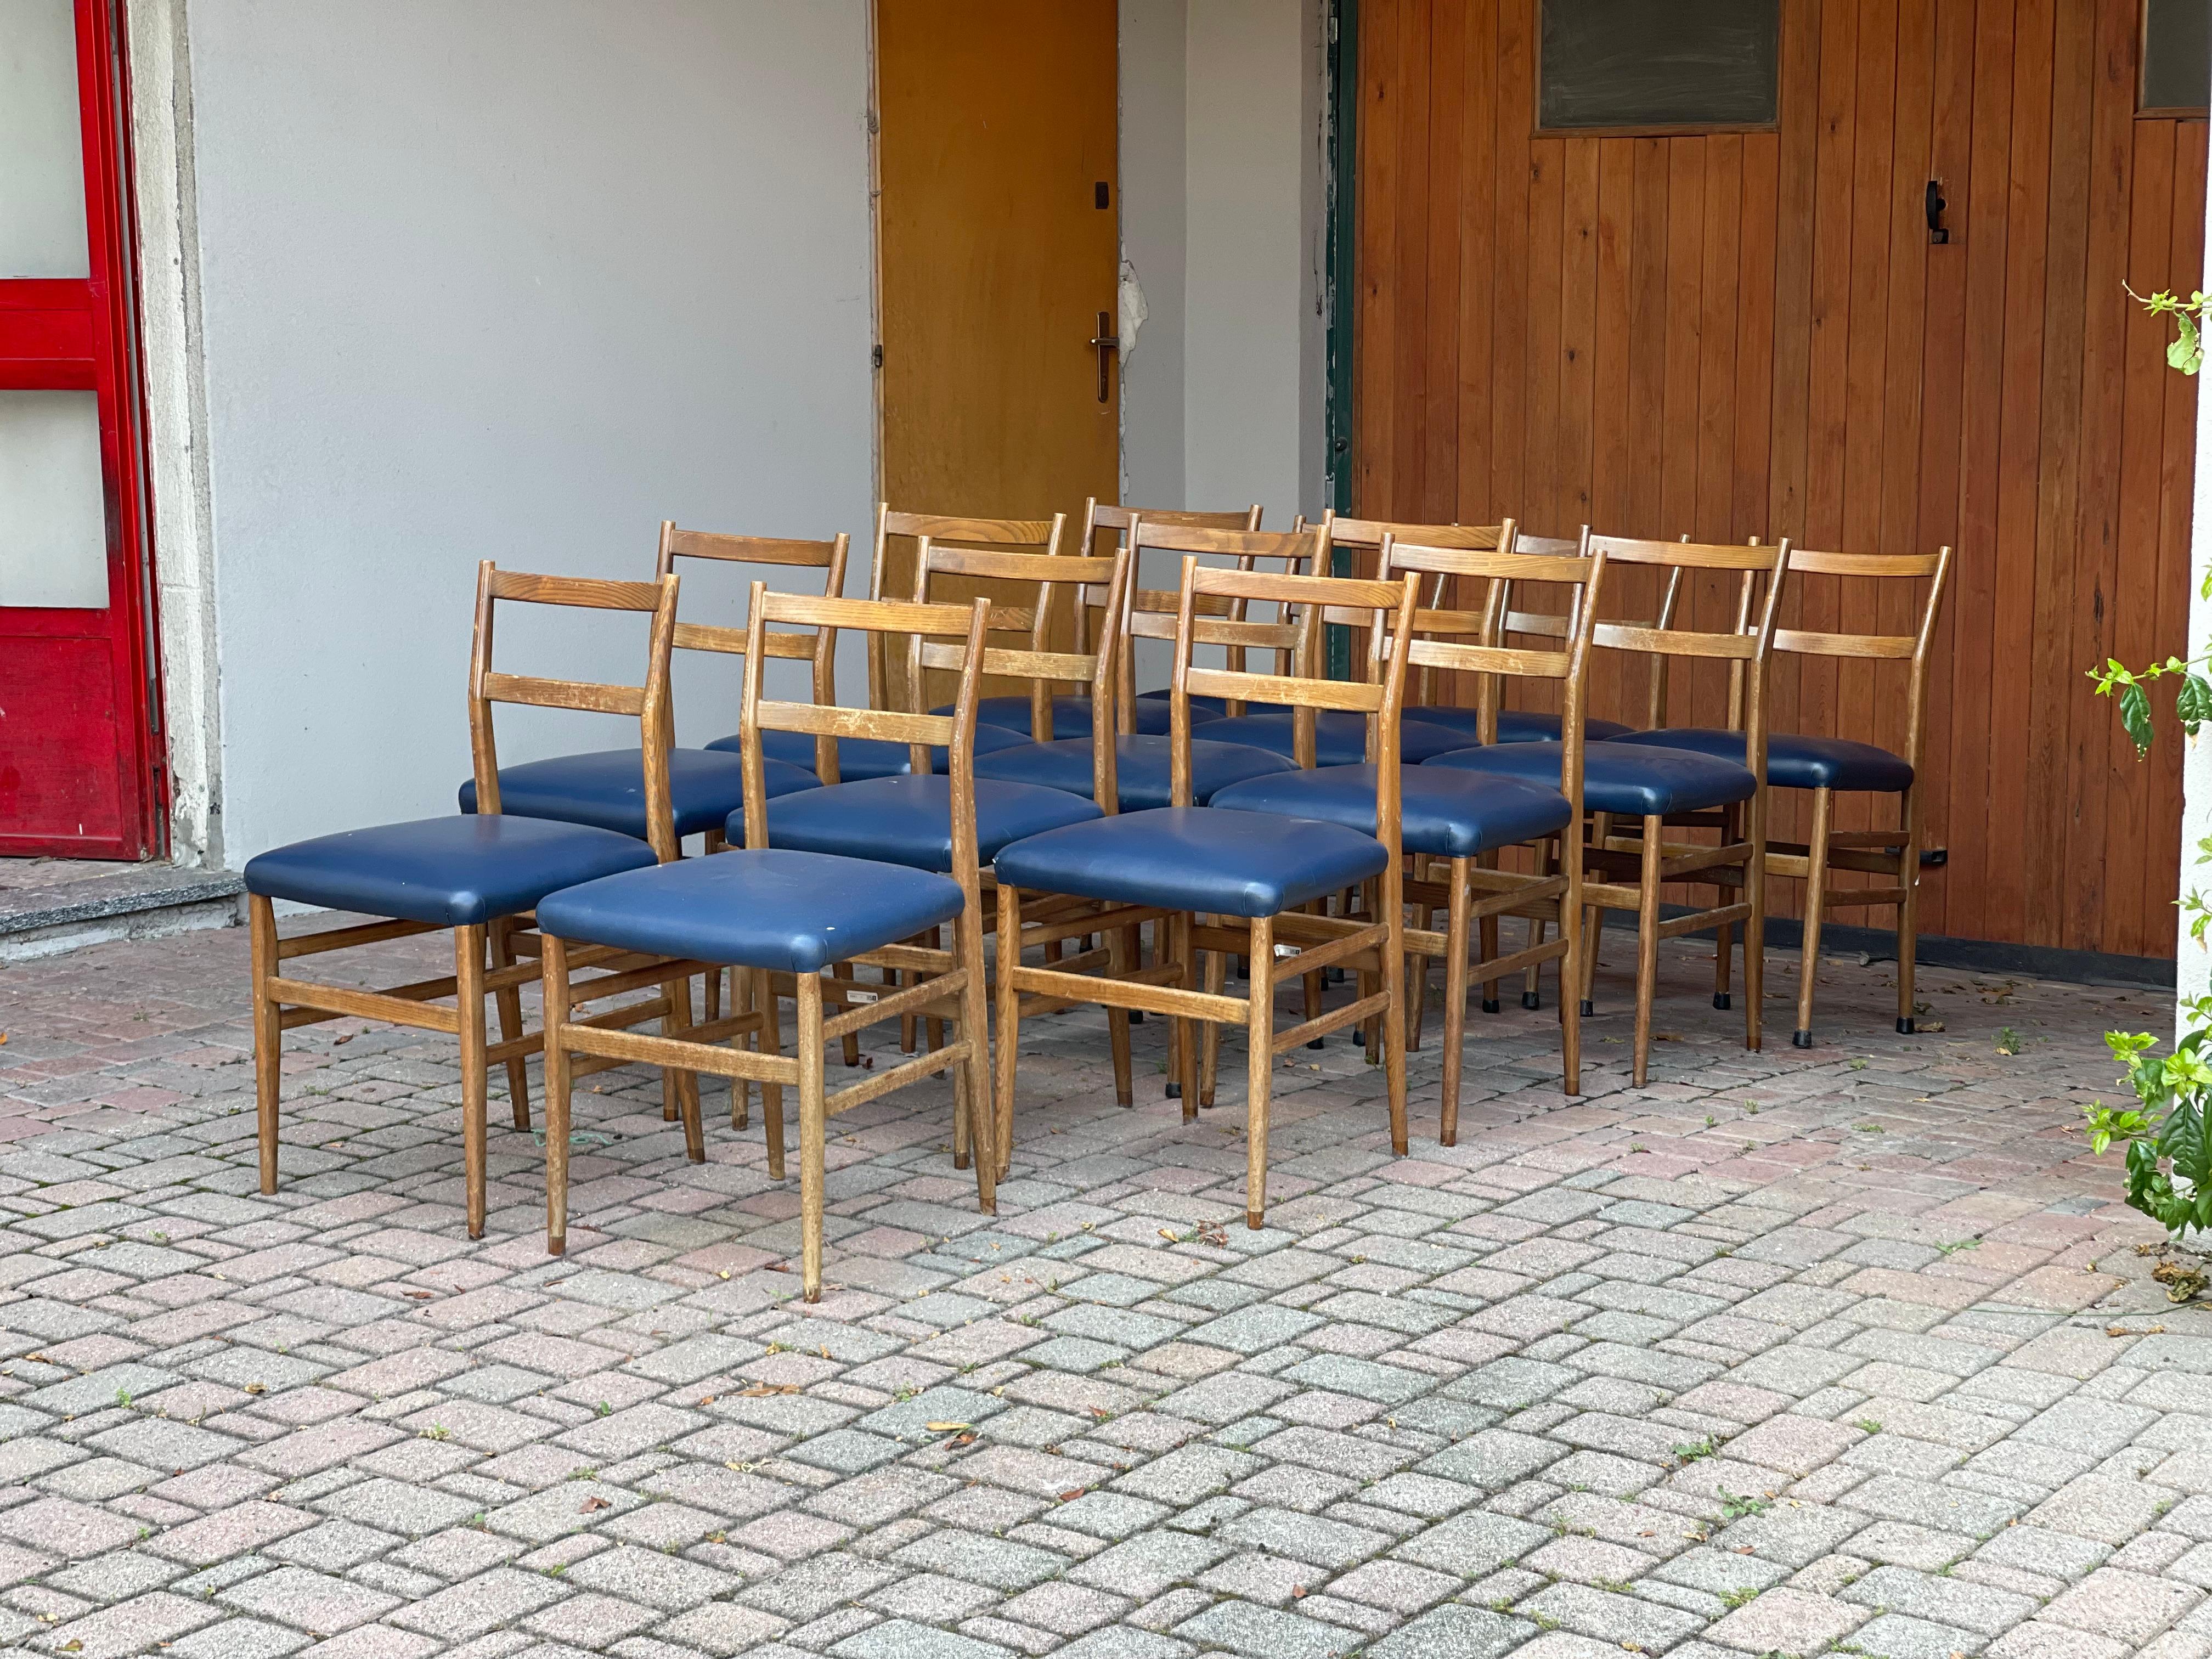 14 Leggera chairs by Gio Ponti - Wood And Blue Leather - Original Conditions  In Good Condition For Sale In Milano, IT